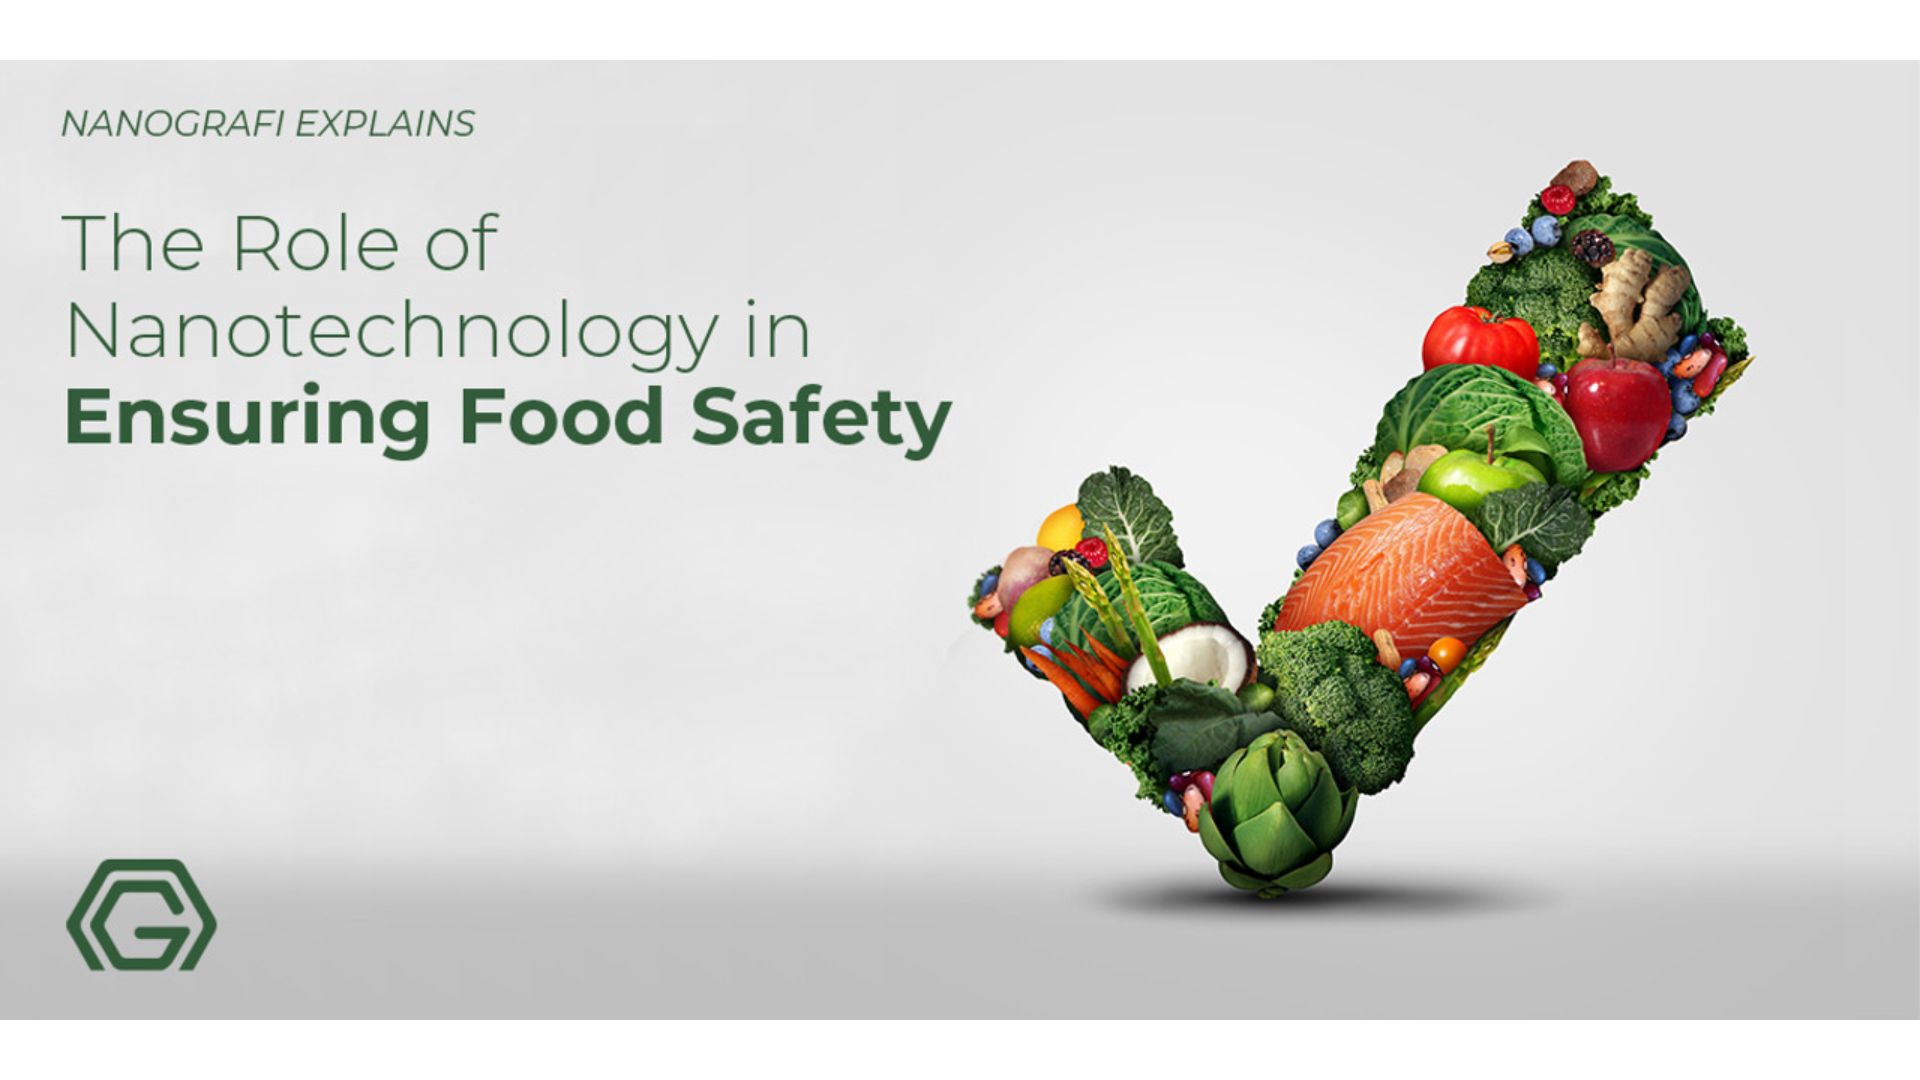 The role of nanotechnology in ensuring food safety